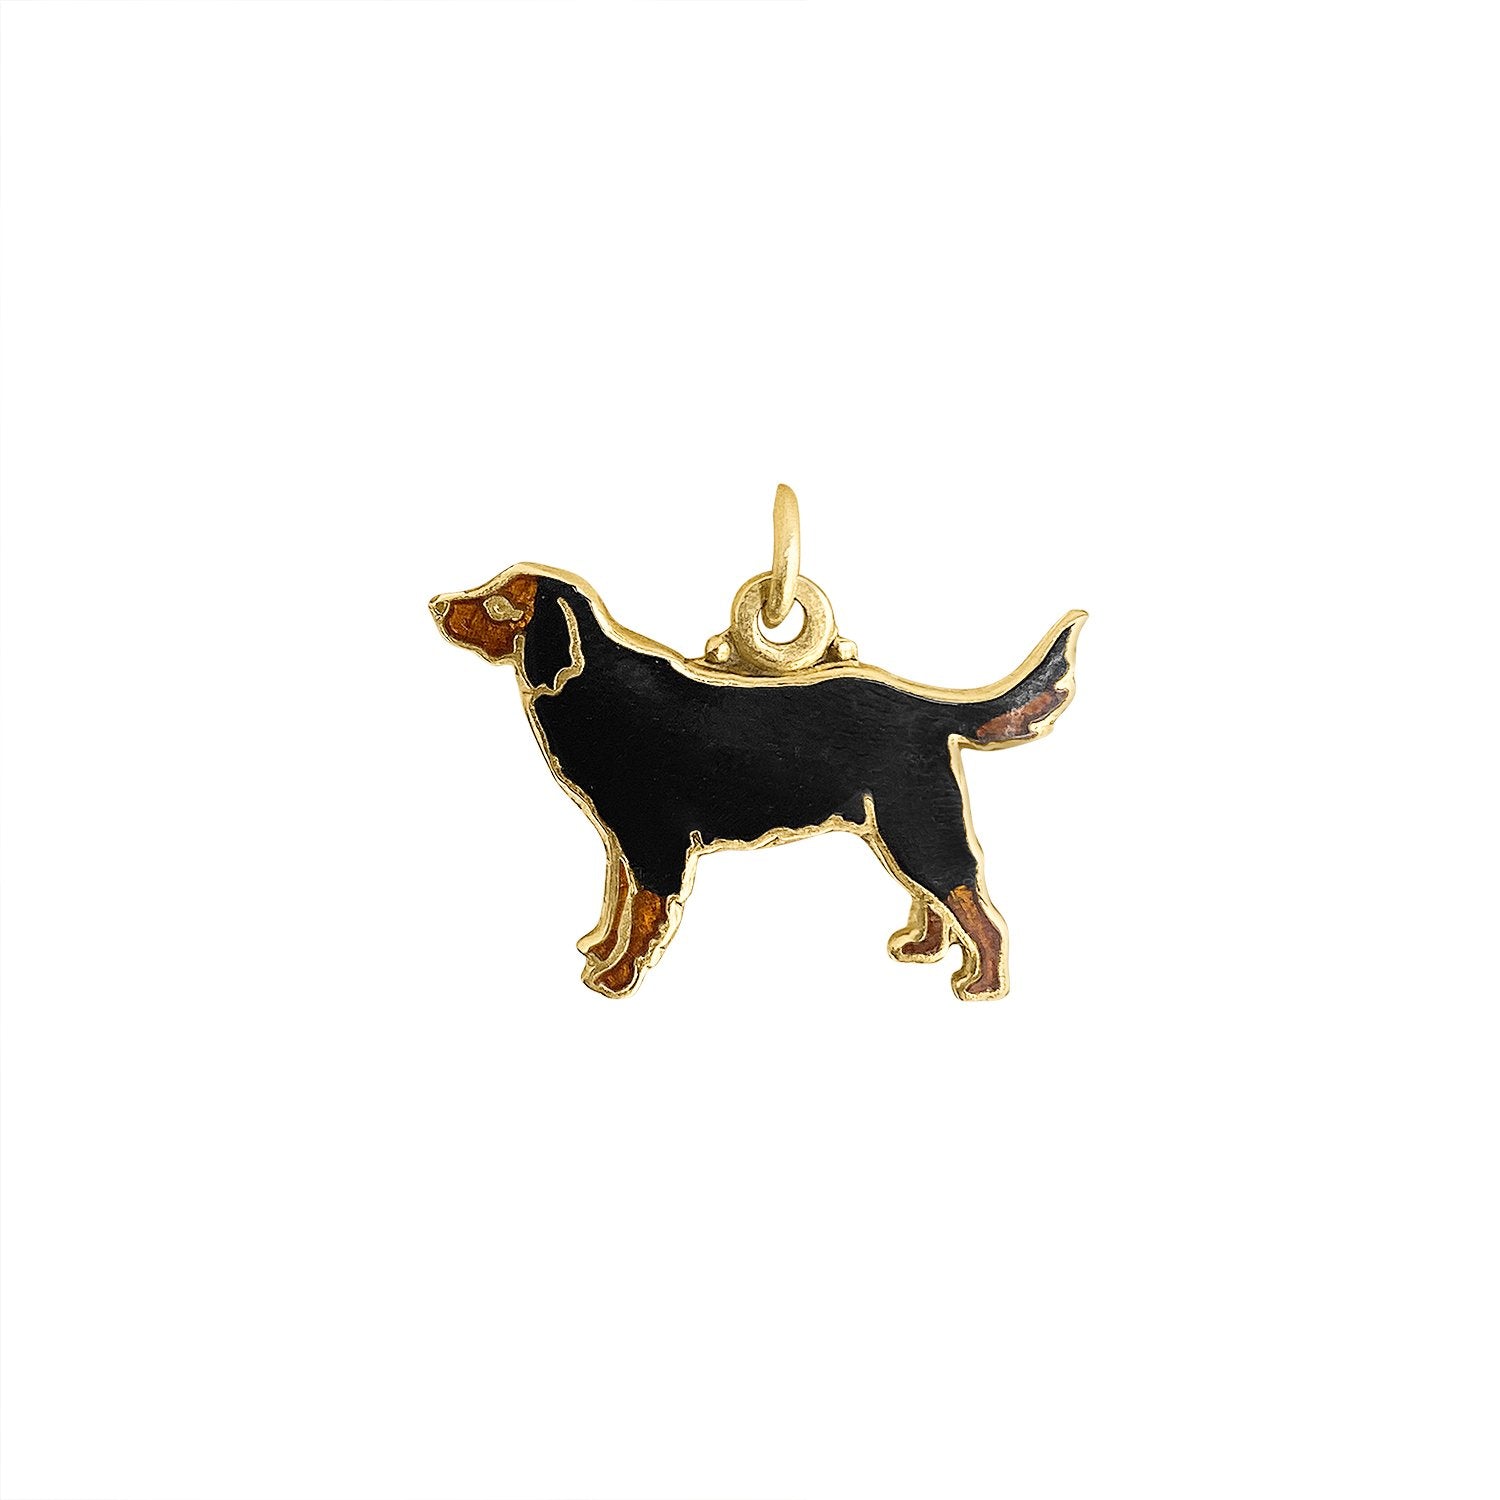 Vintage 1940's Dog Charm by Fewer Finer